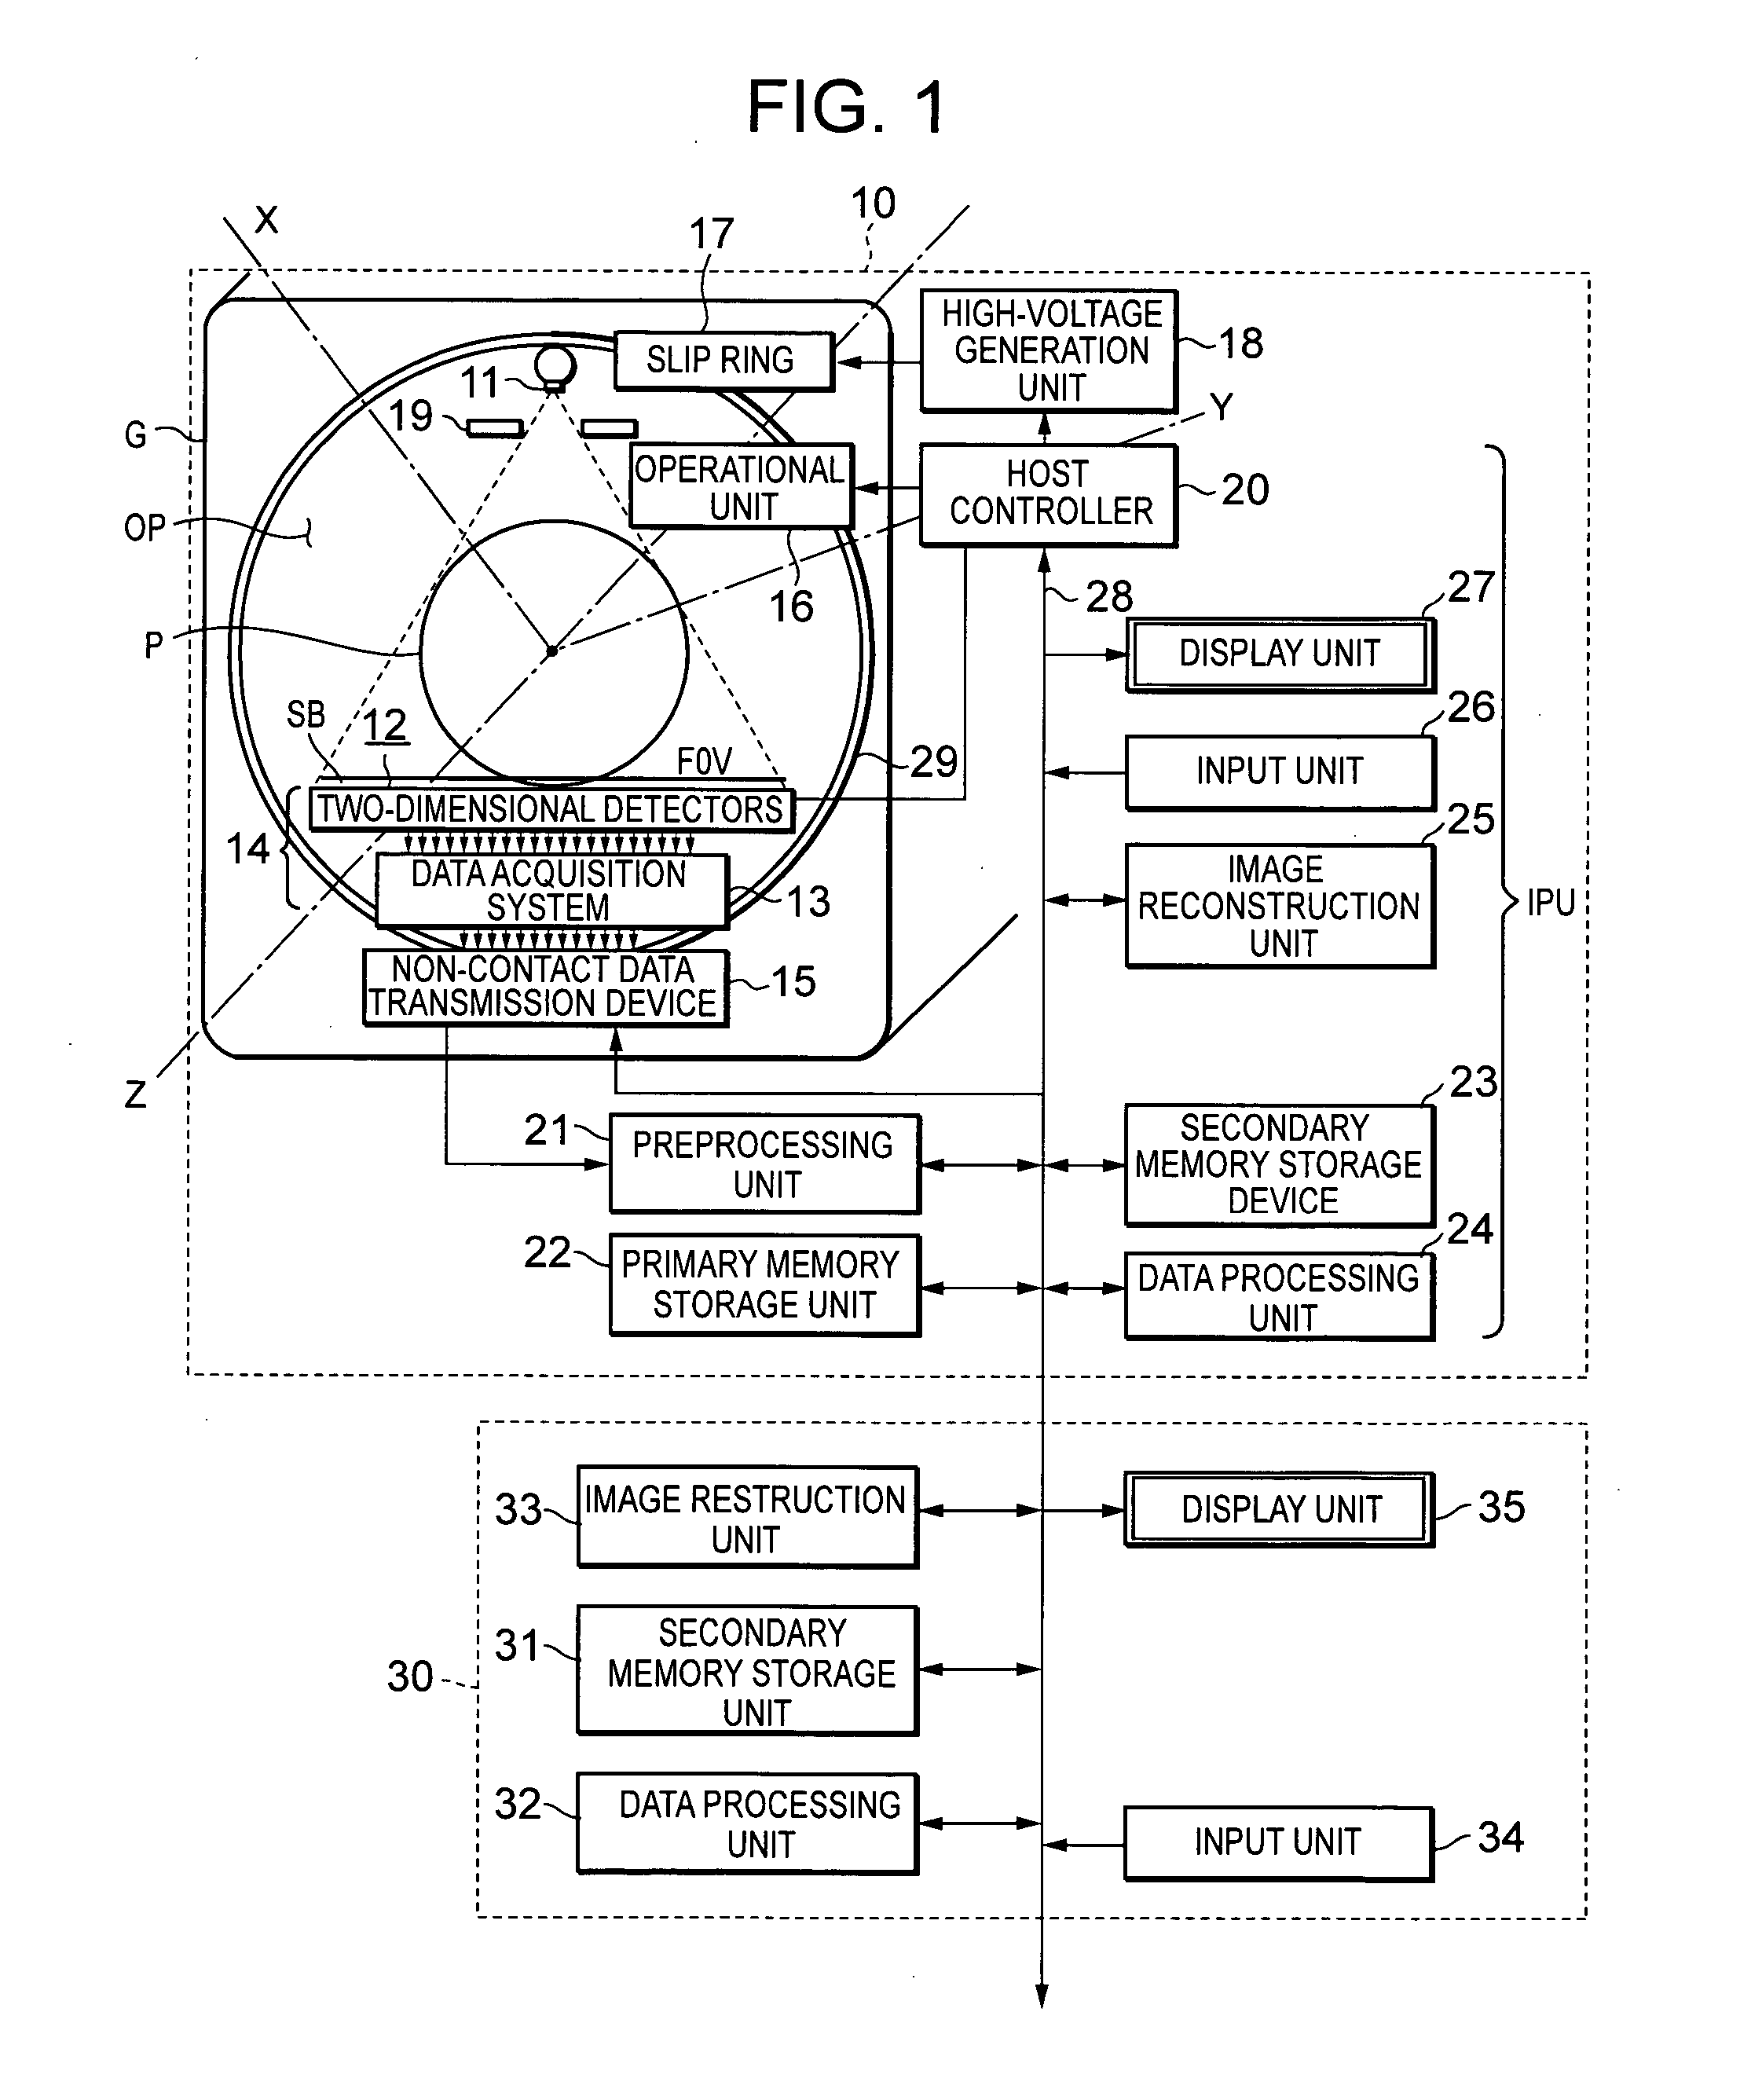 Image enhancement or correction software, method, apparatus and system for substantially minimizing blur in the scanned image